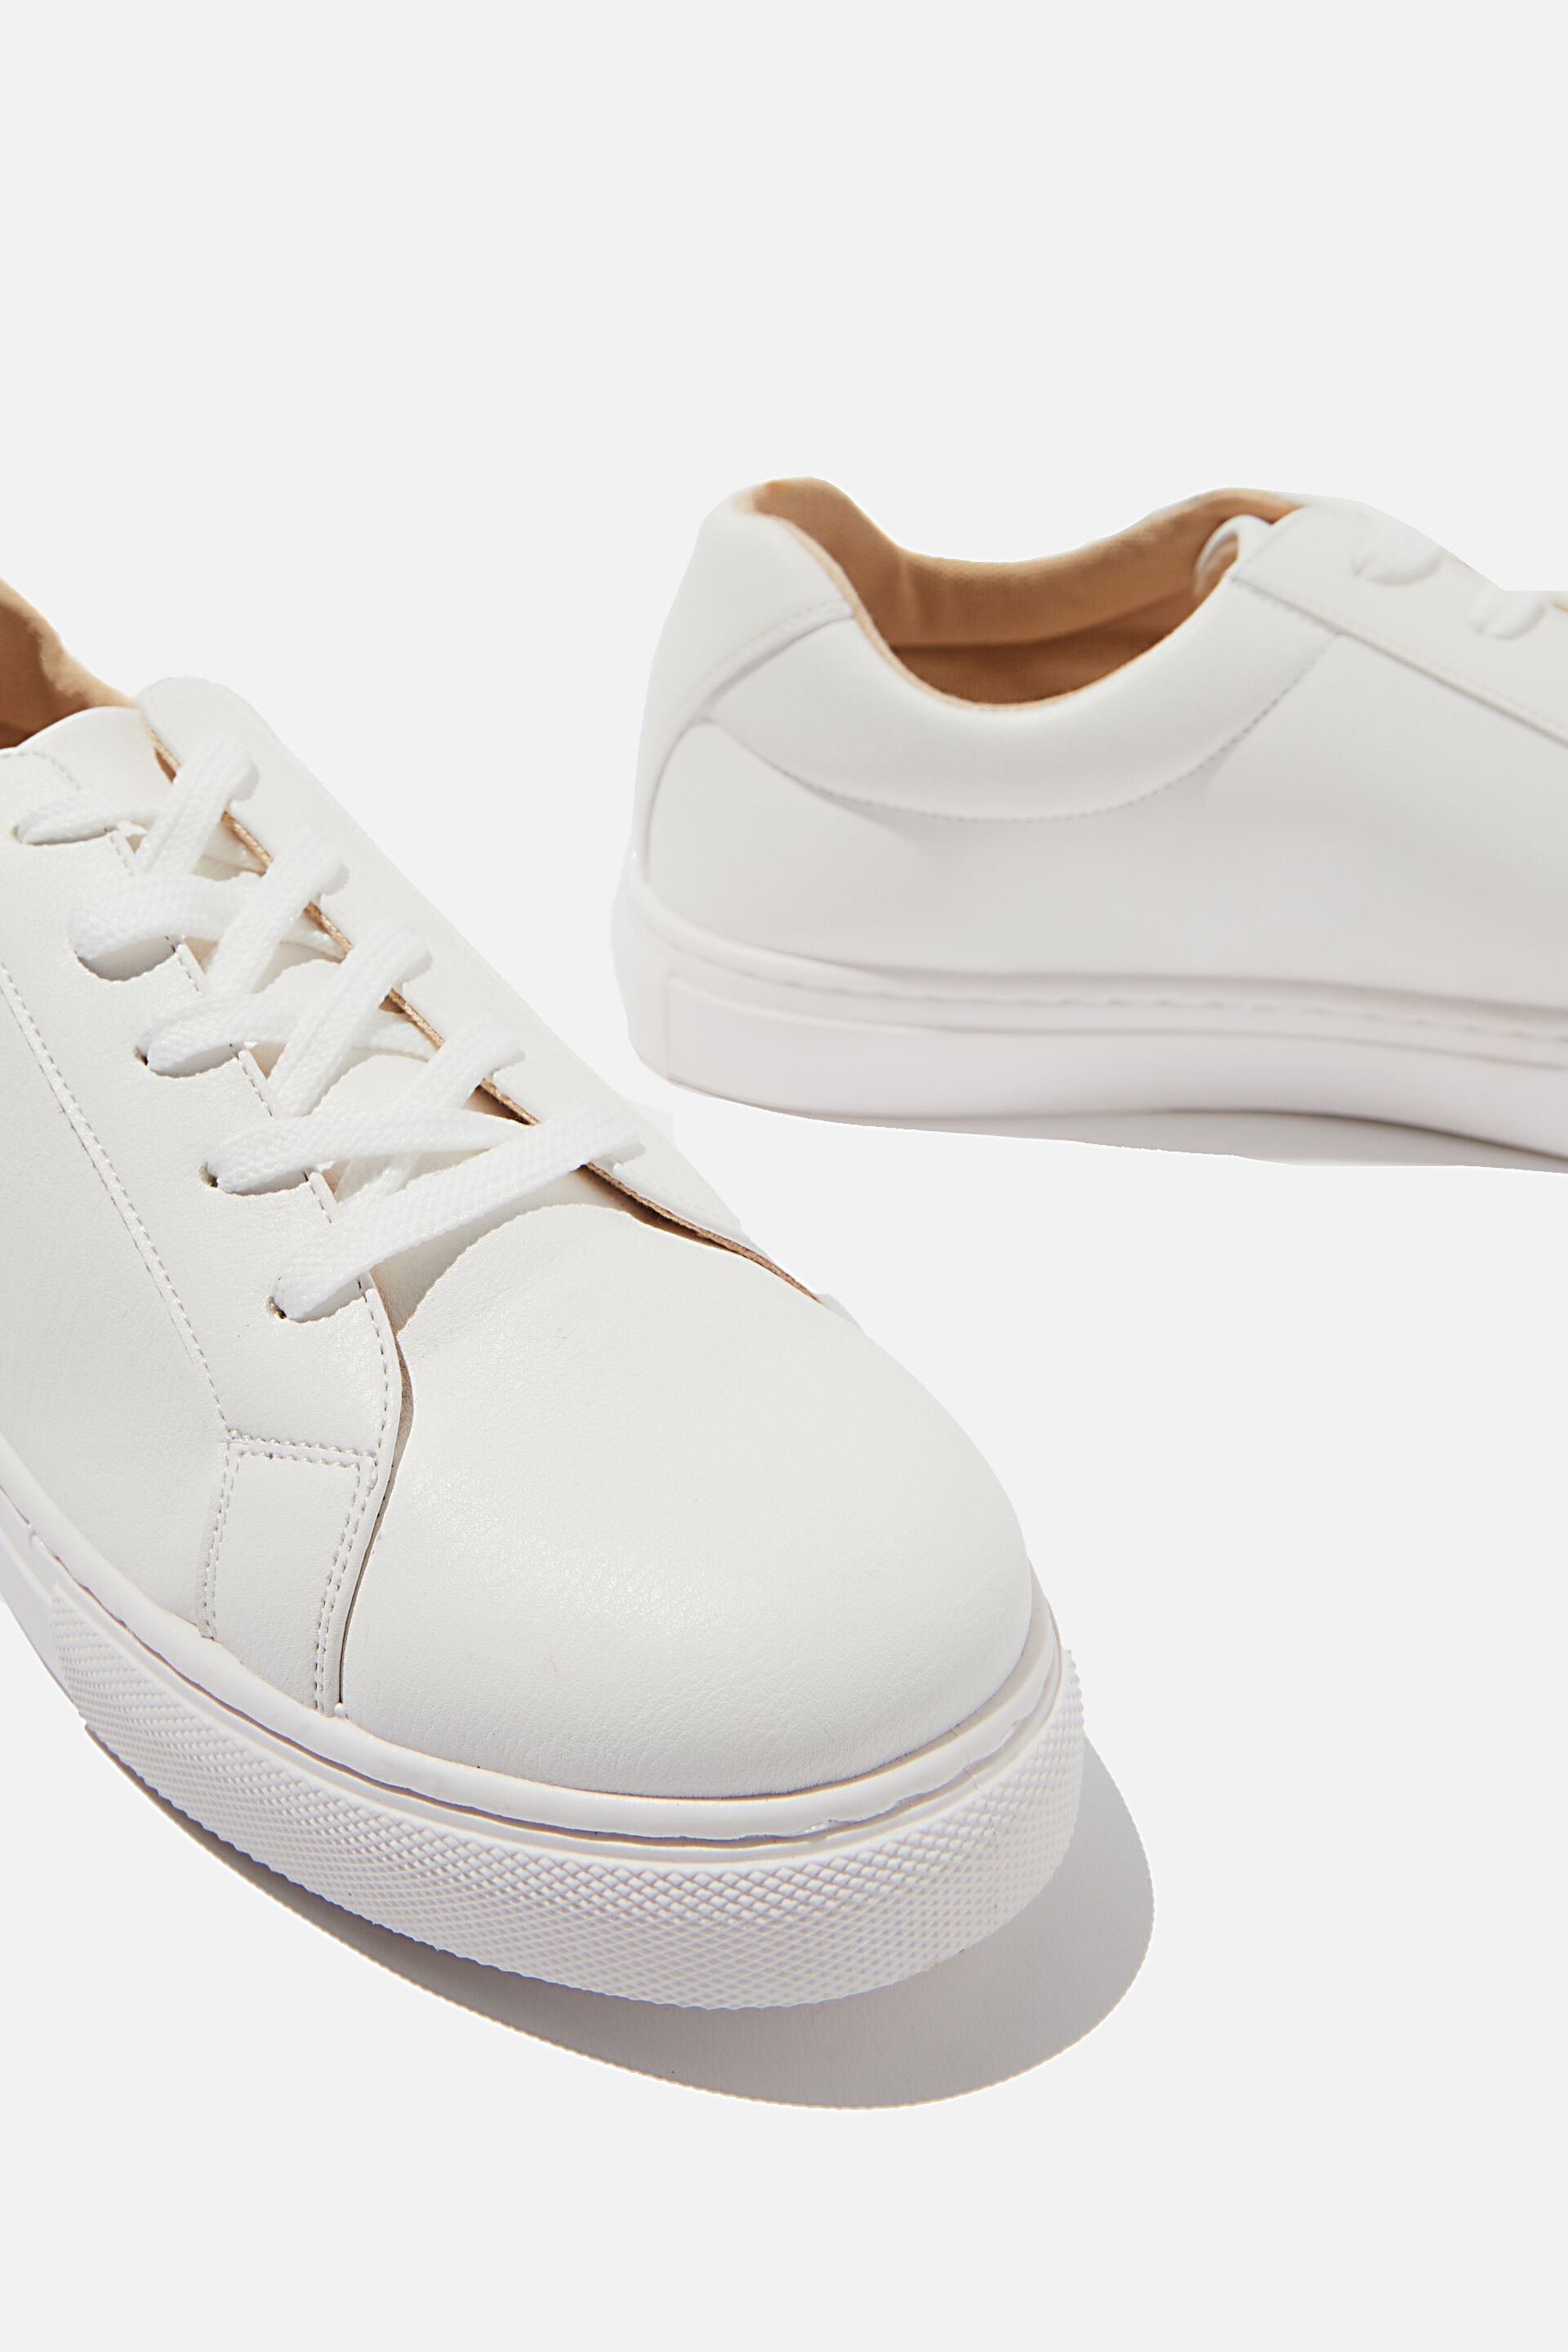 low rise white sneakers